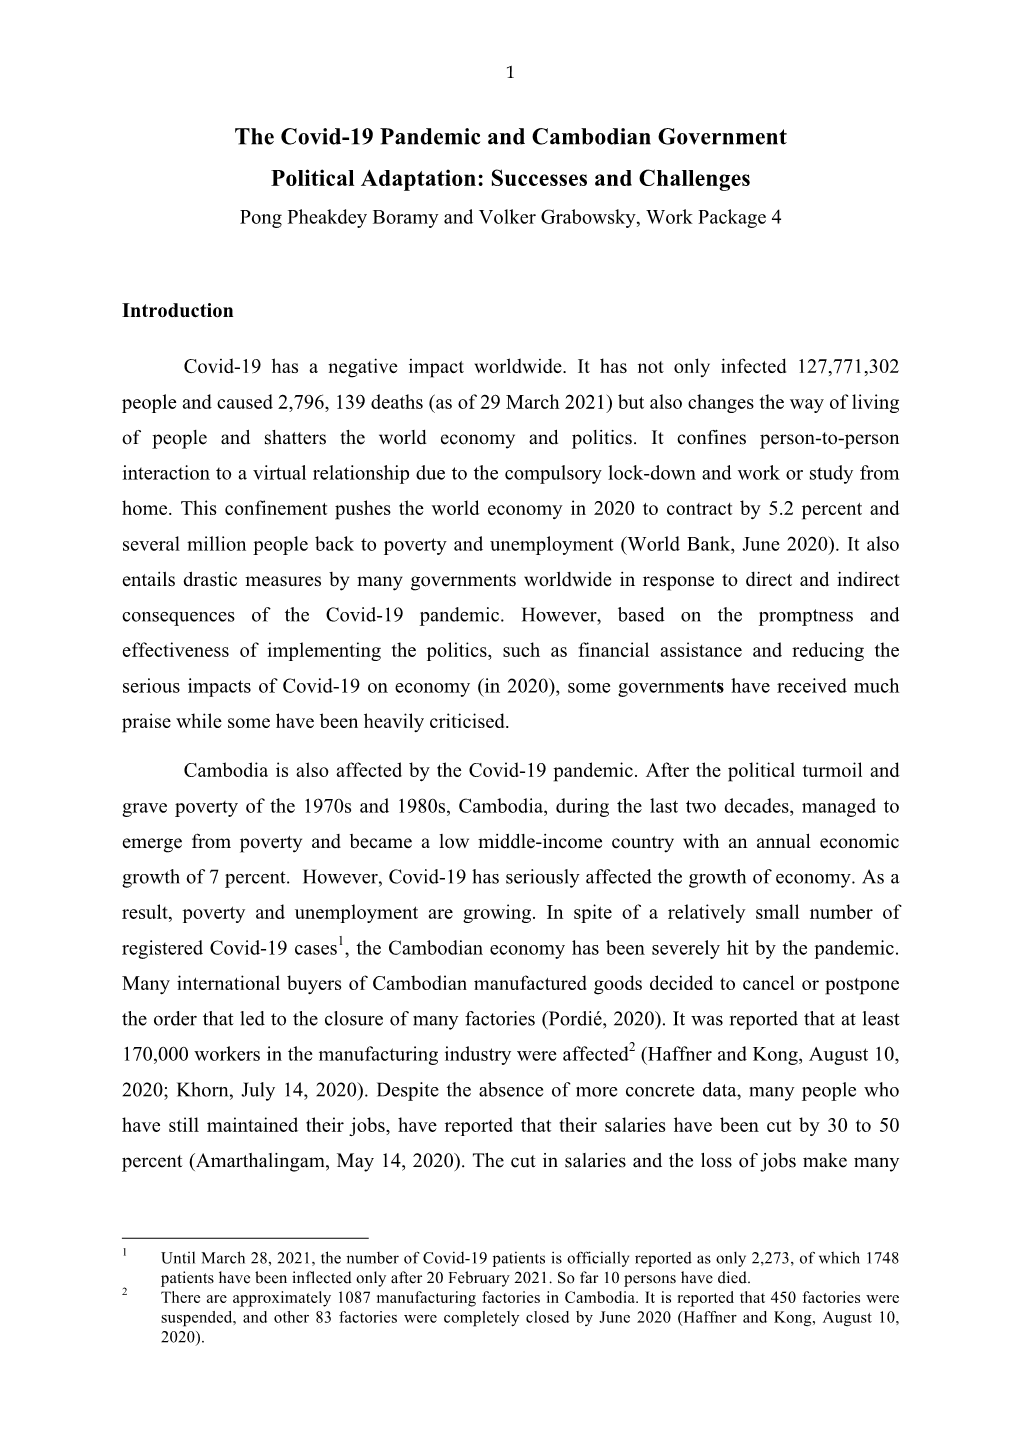 The Covid-19 Pandemic and Cambodian Government Political Adaptation: Successes and Challenges Pong Pheakdey Boramy and Volker Grabowsky, Work Package 4